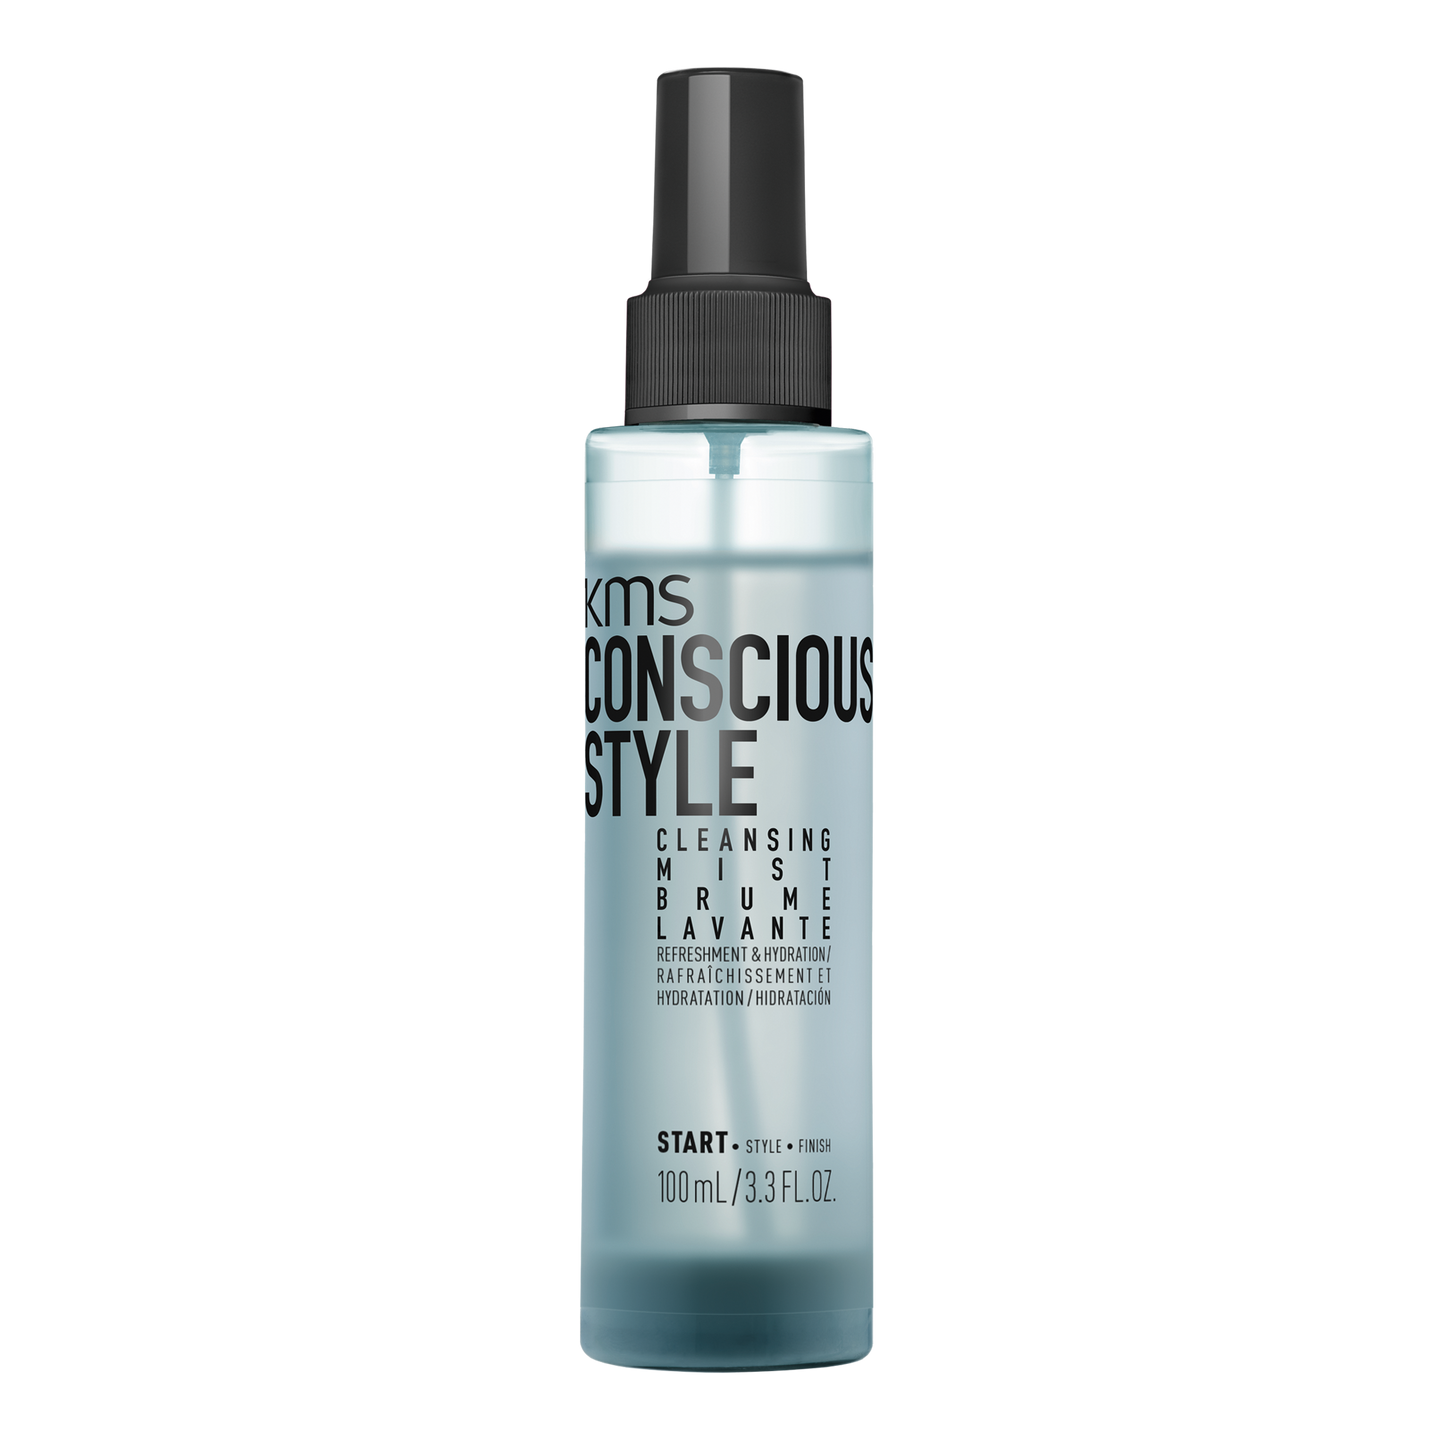 KMS CONSCIOUS STYLE Cleansing Mist 100mL